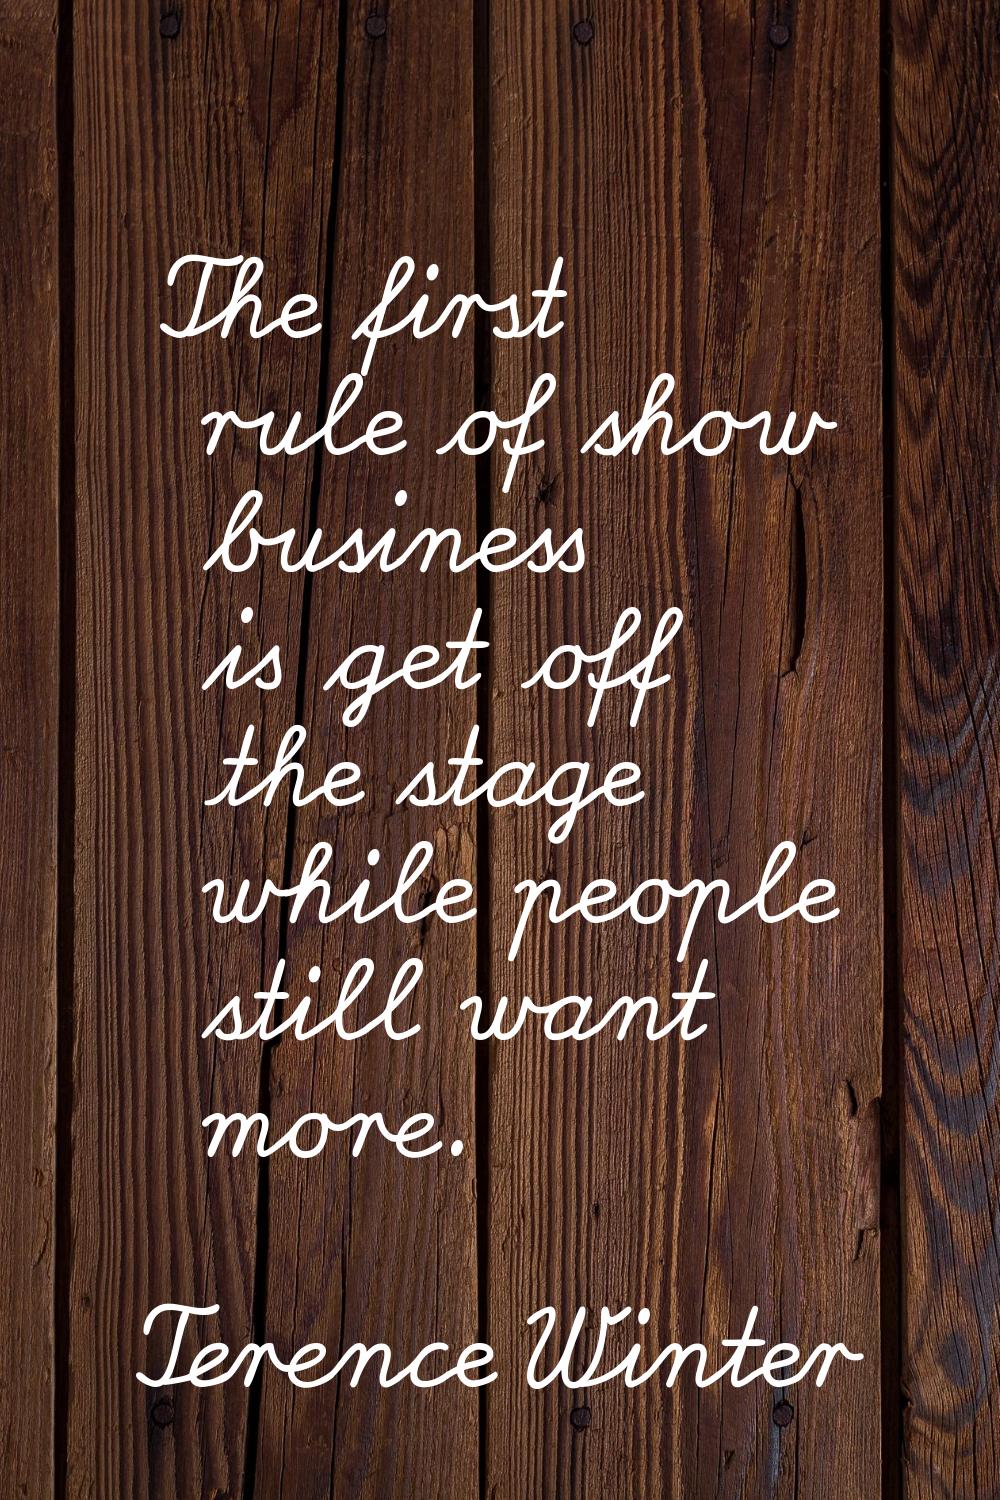 The first rule of show business is get off the stage while people still want more.